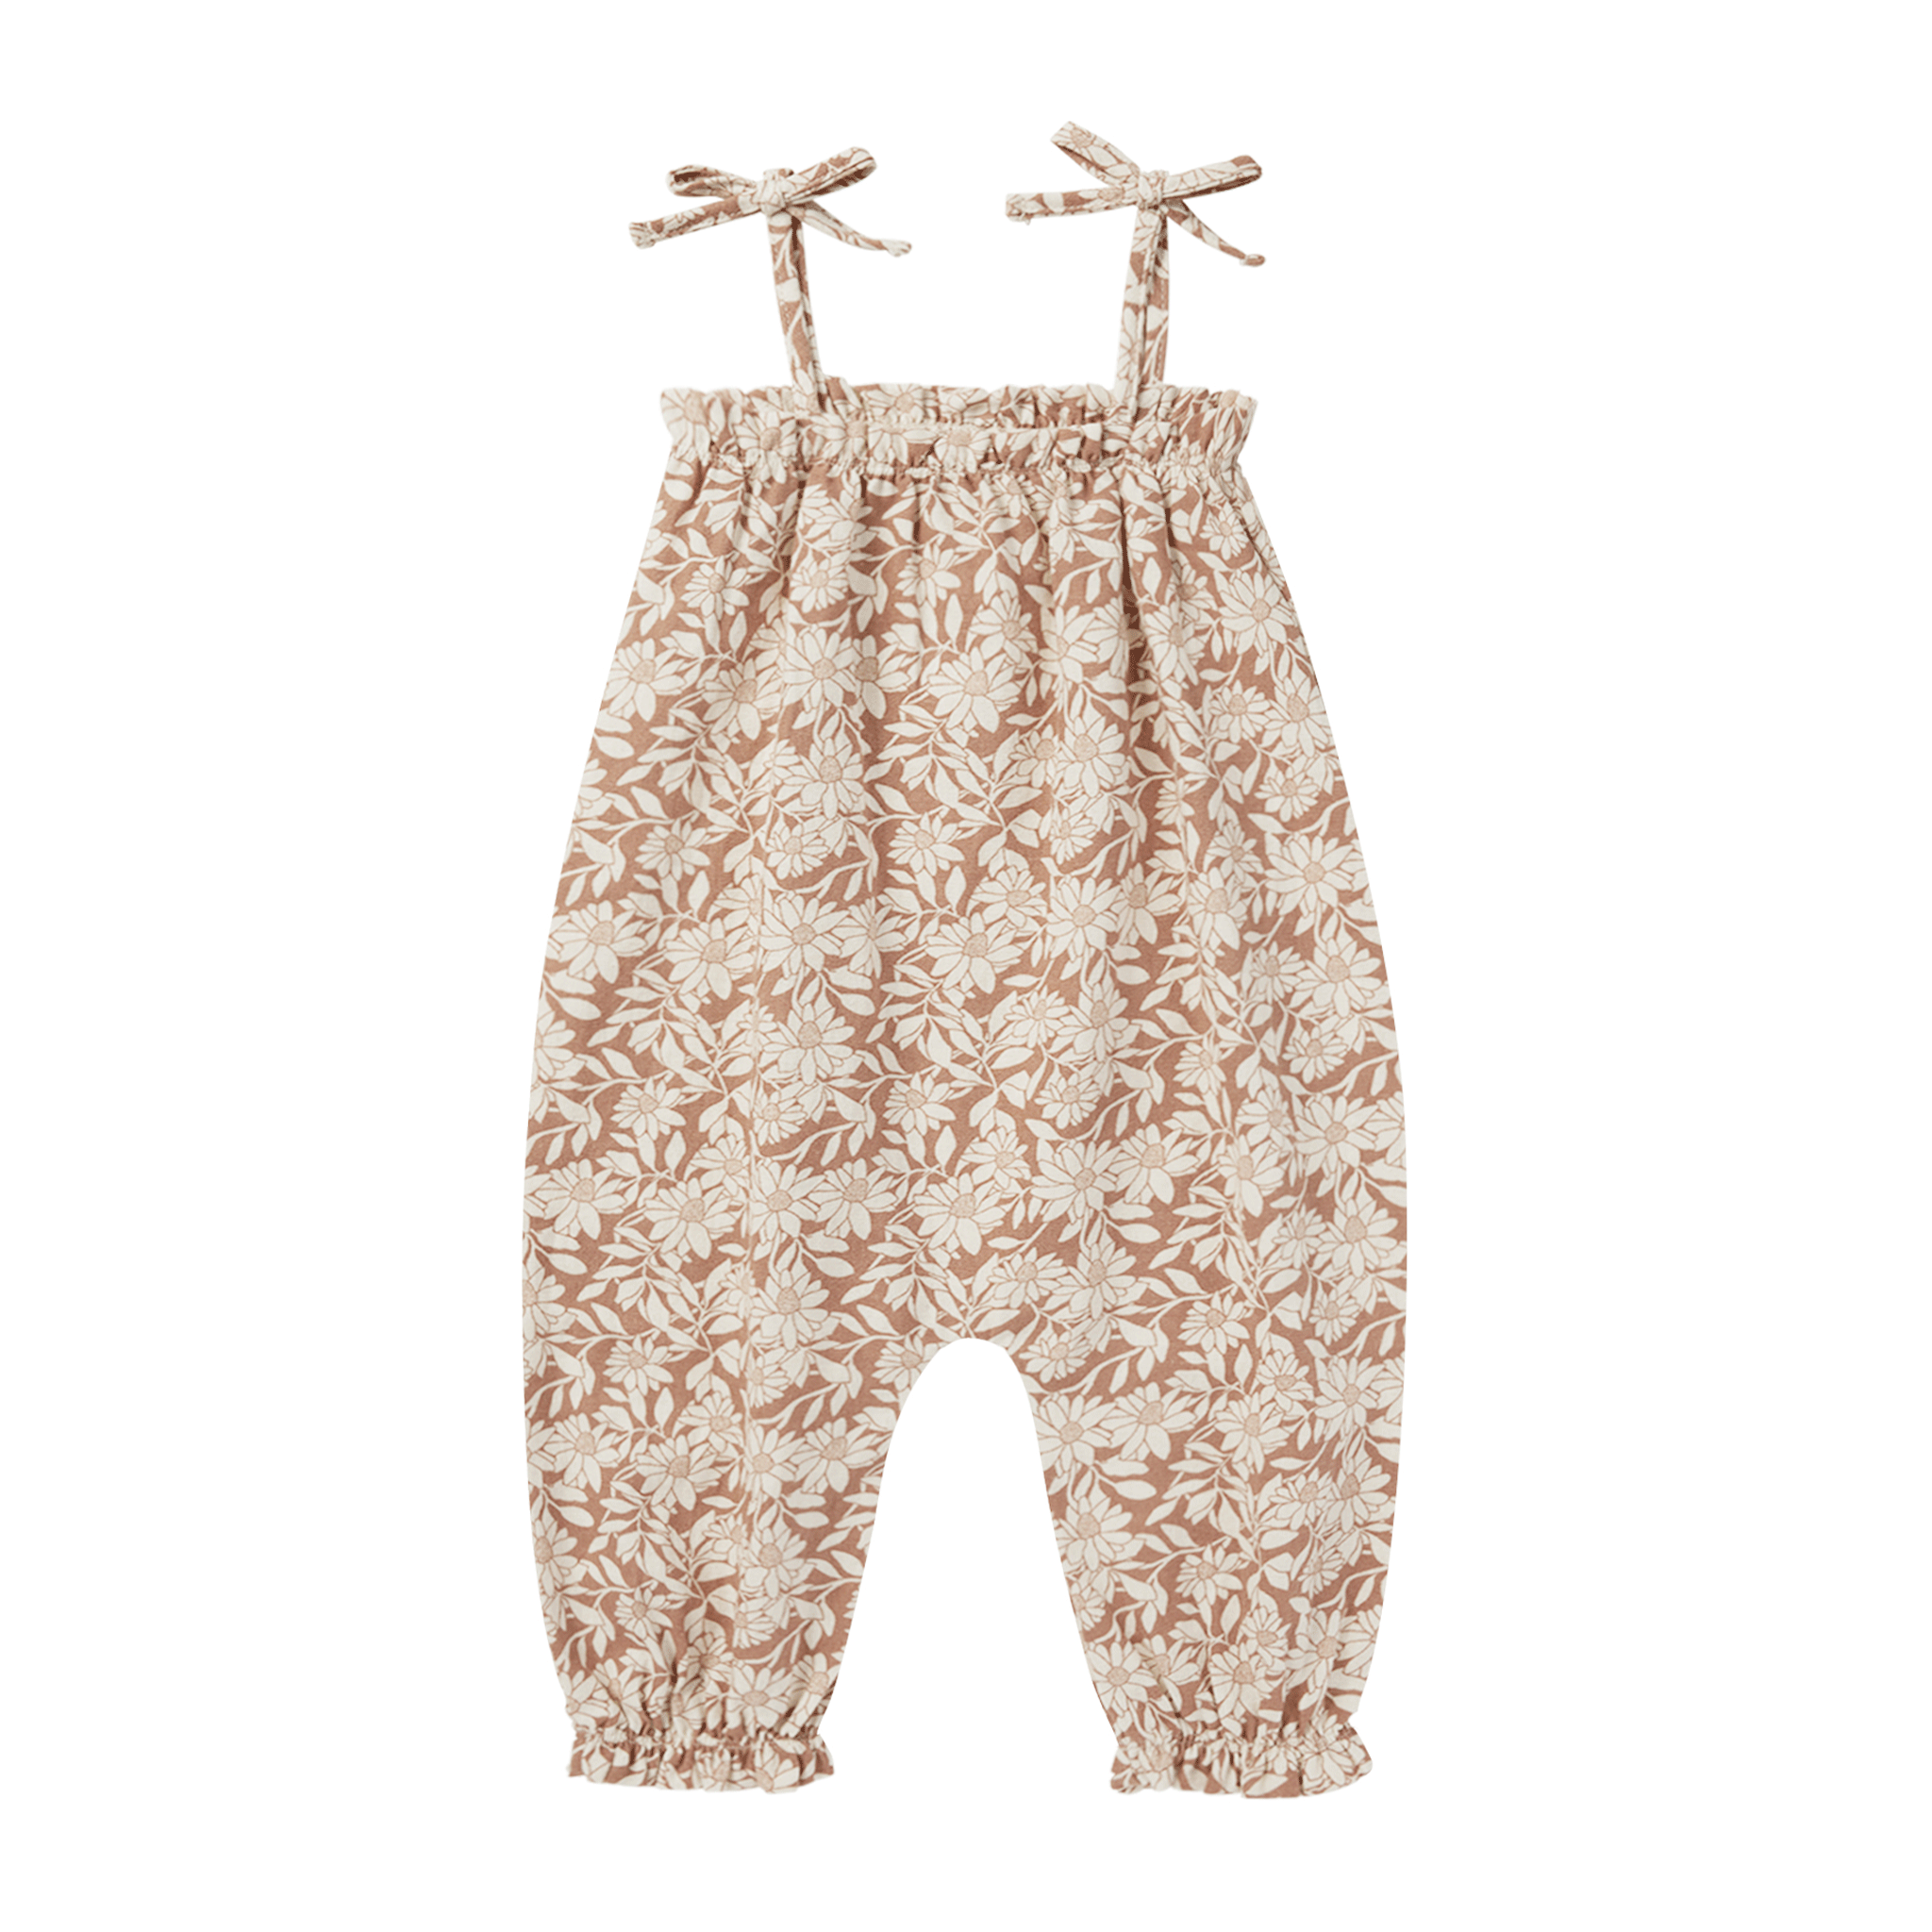 On a white background is a children's jumpsuit with a neutral floral print and shoulder tie strap details. 